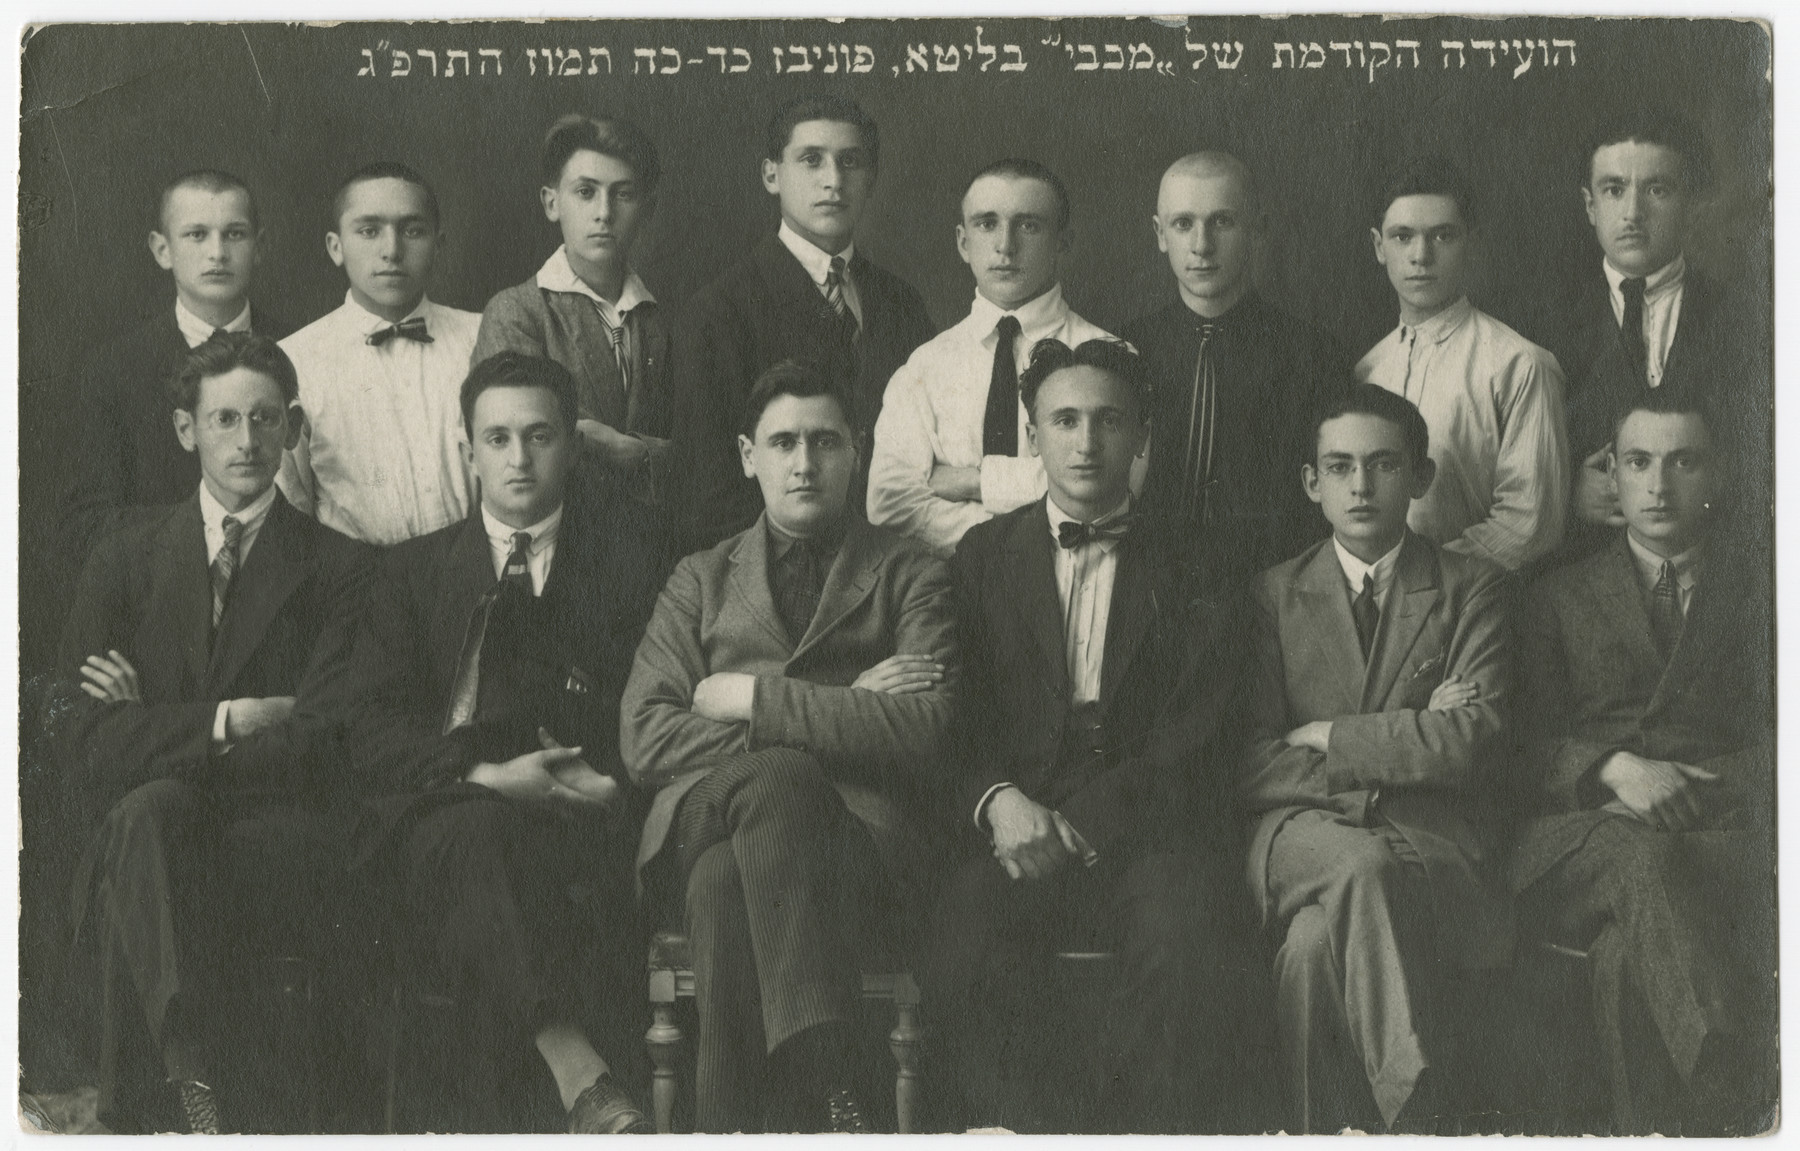 Group portrait of the members of Maccabi (a Zionist sports club) in Panevezys.

Samuel Gotz is in the front row, thirs from the left.